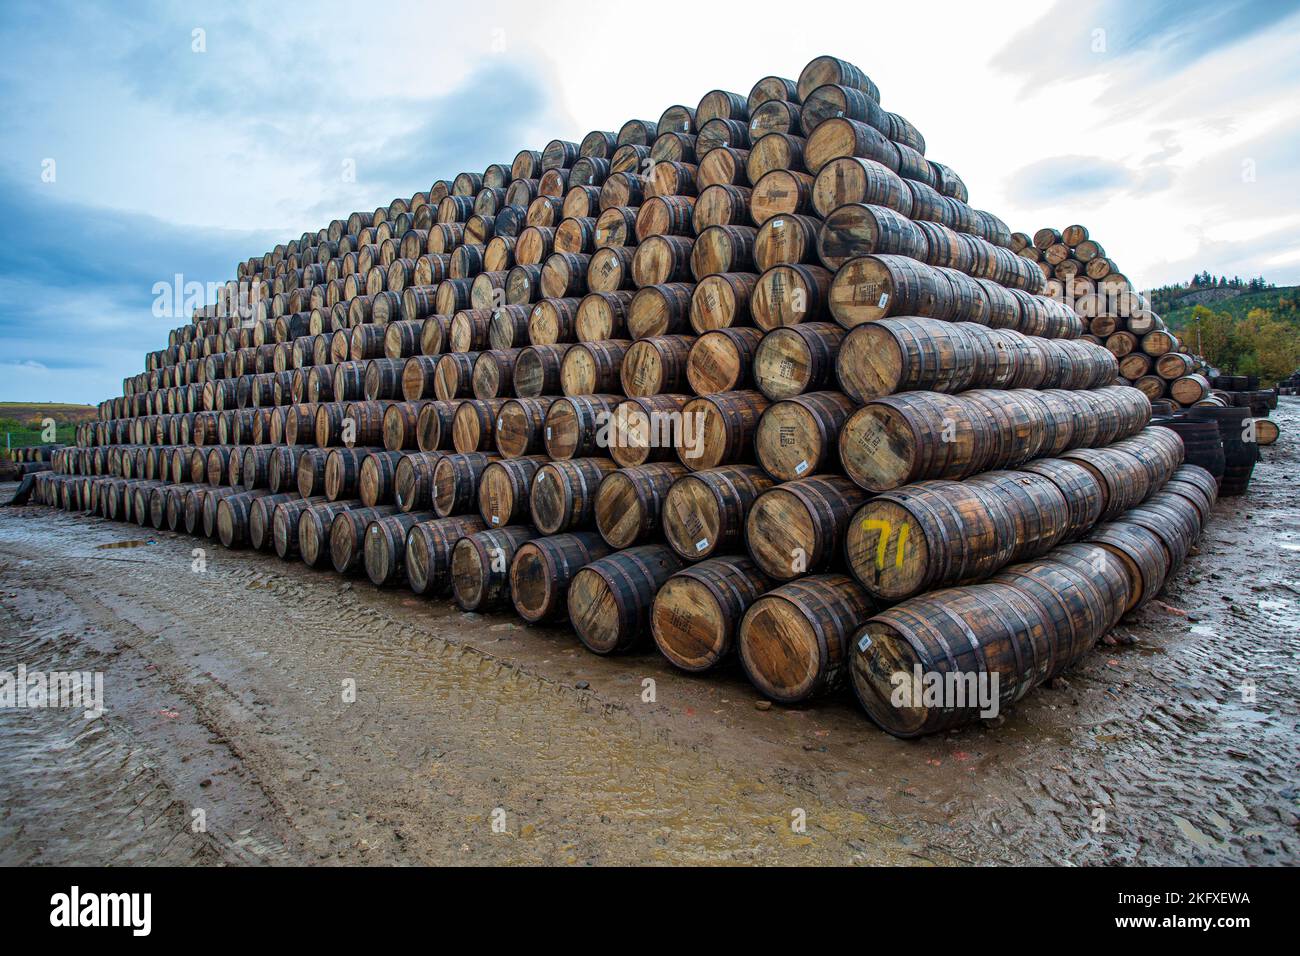 Scotland, Speyside Cooperage in Craigellachie where thousands of scotch whisky casks are refurbished and repaired for use by the distilleries. Stock Photo